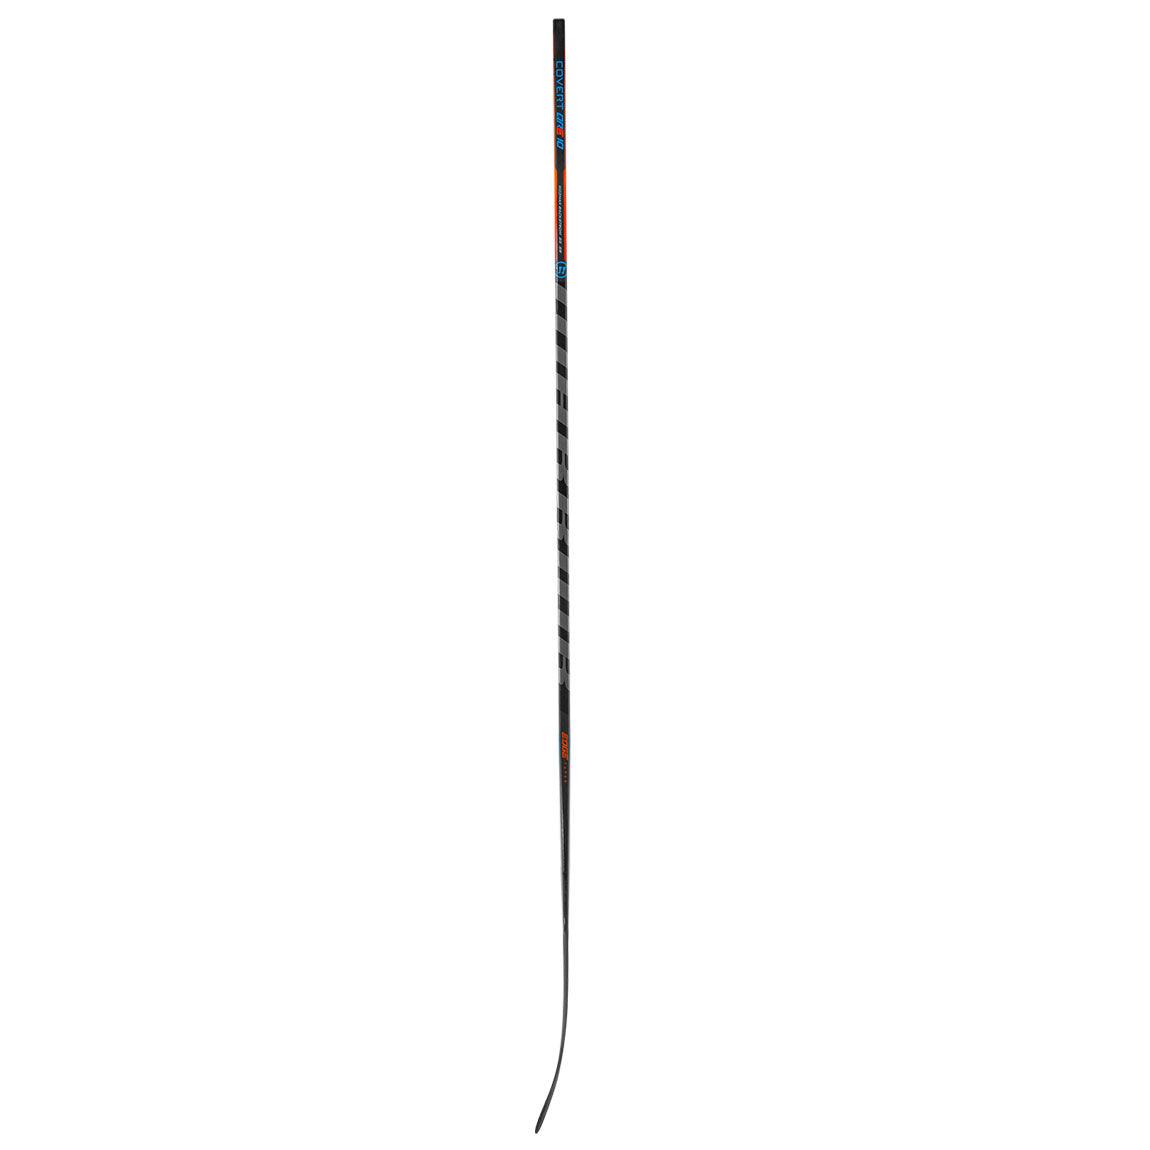 Covert QRE 10 Clear Hockey Stick - Senior - Sports Excellence